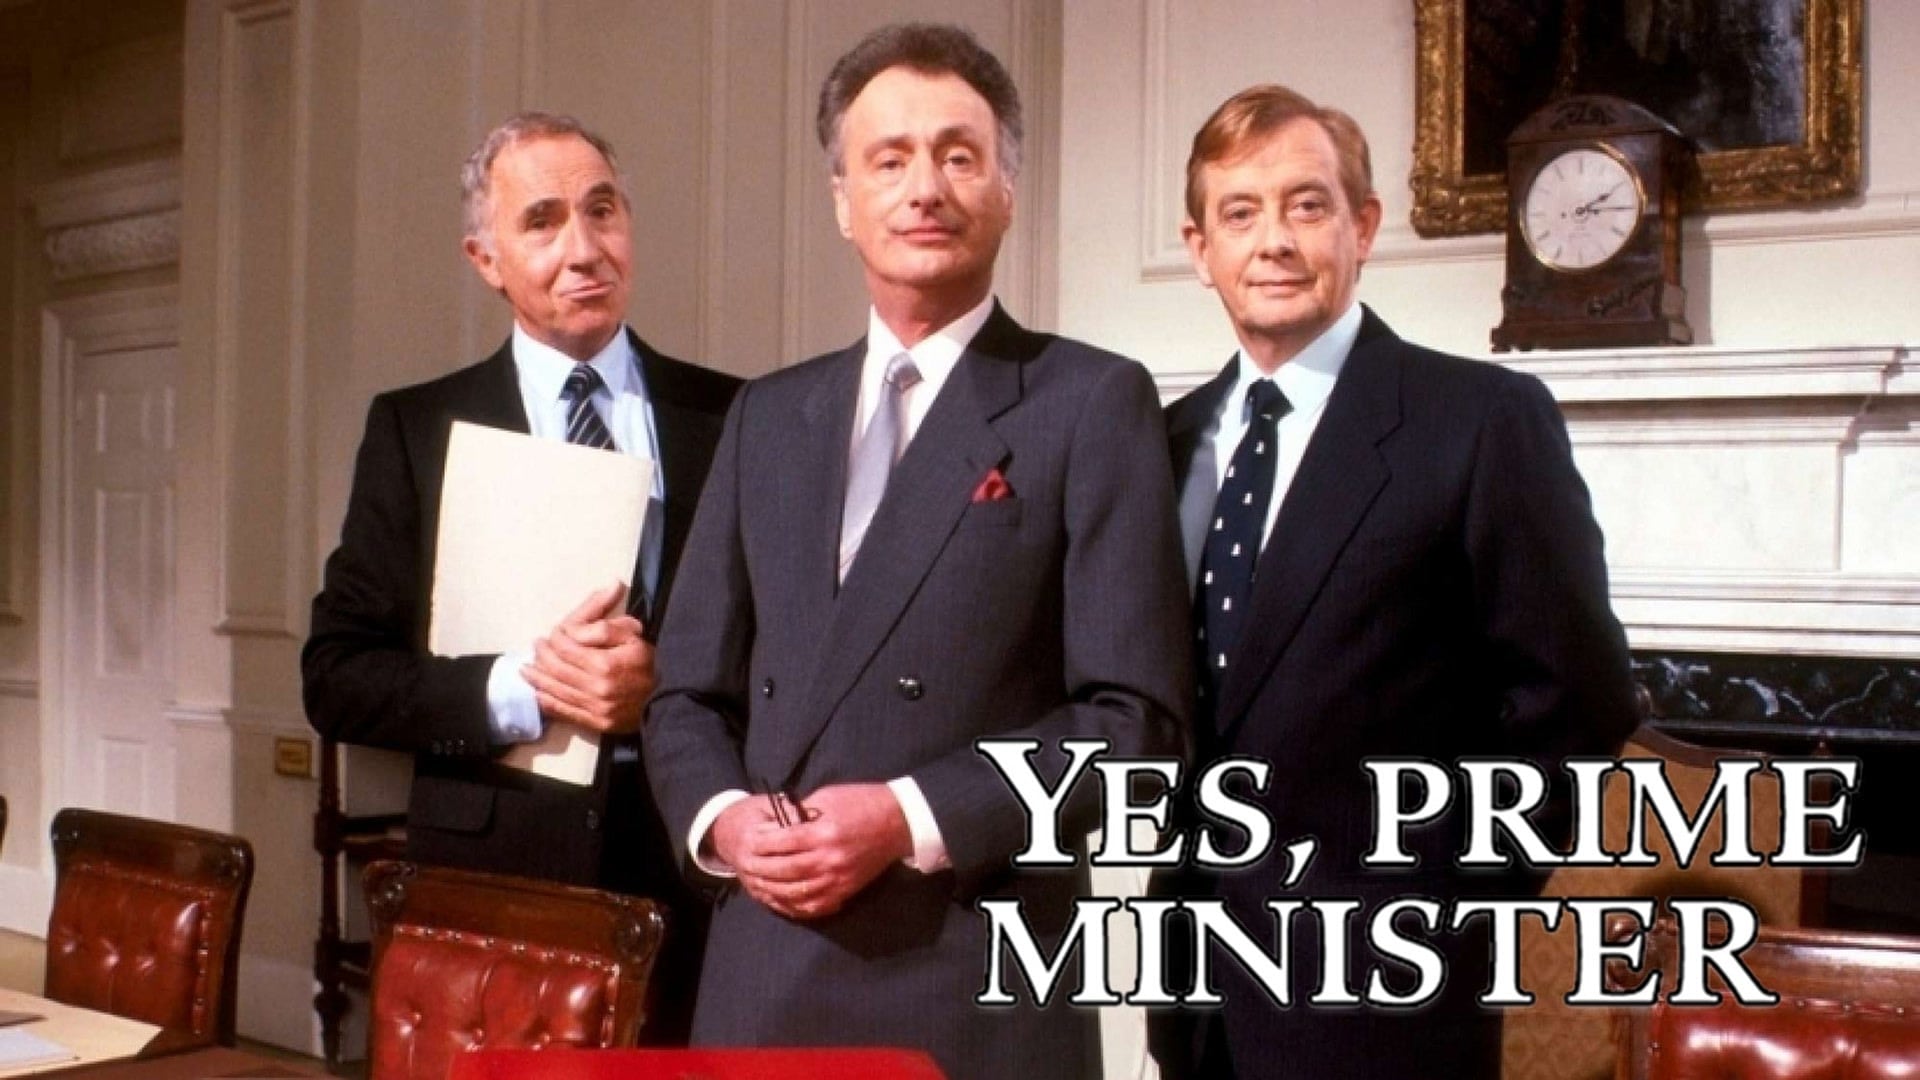 Backdrop Image for Yes, Prime Minister